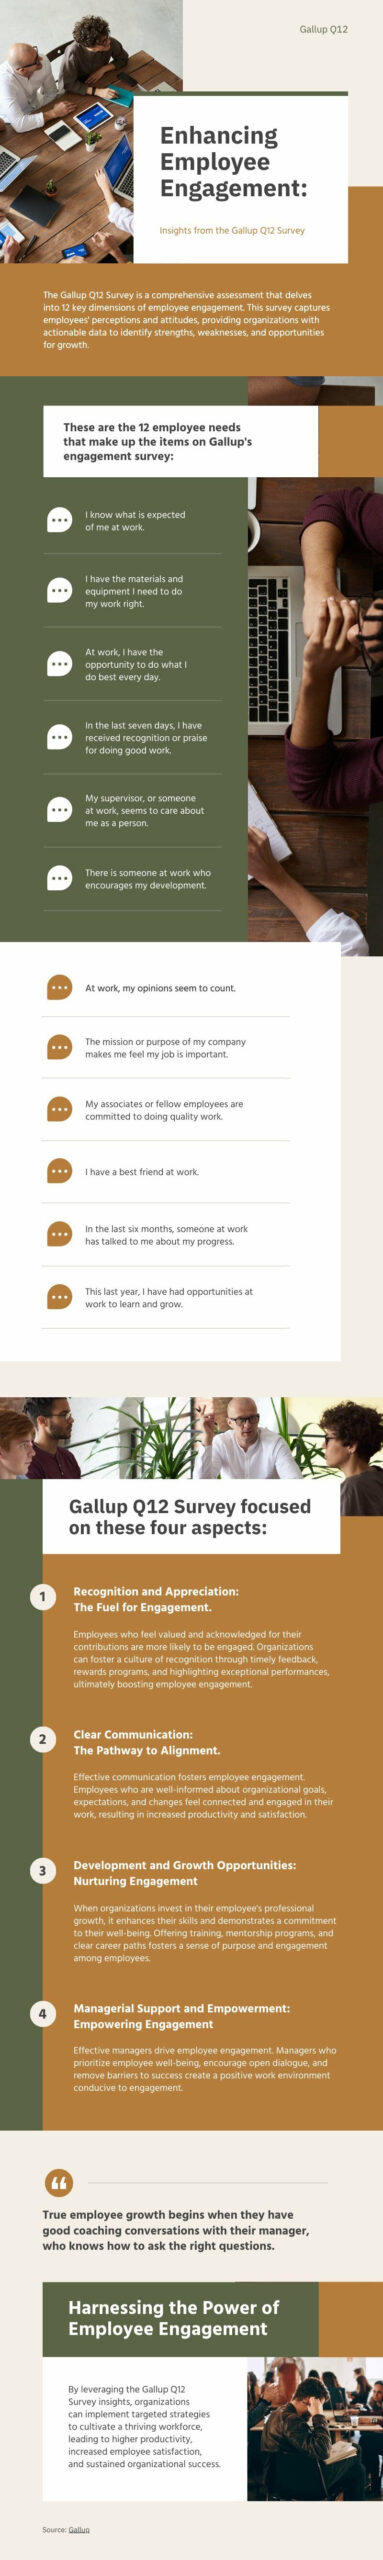 infographic about employee engagement questions from gallup q12